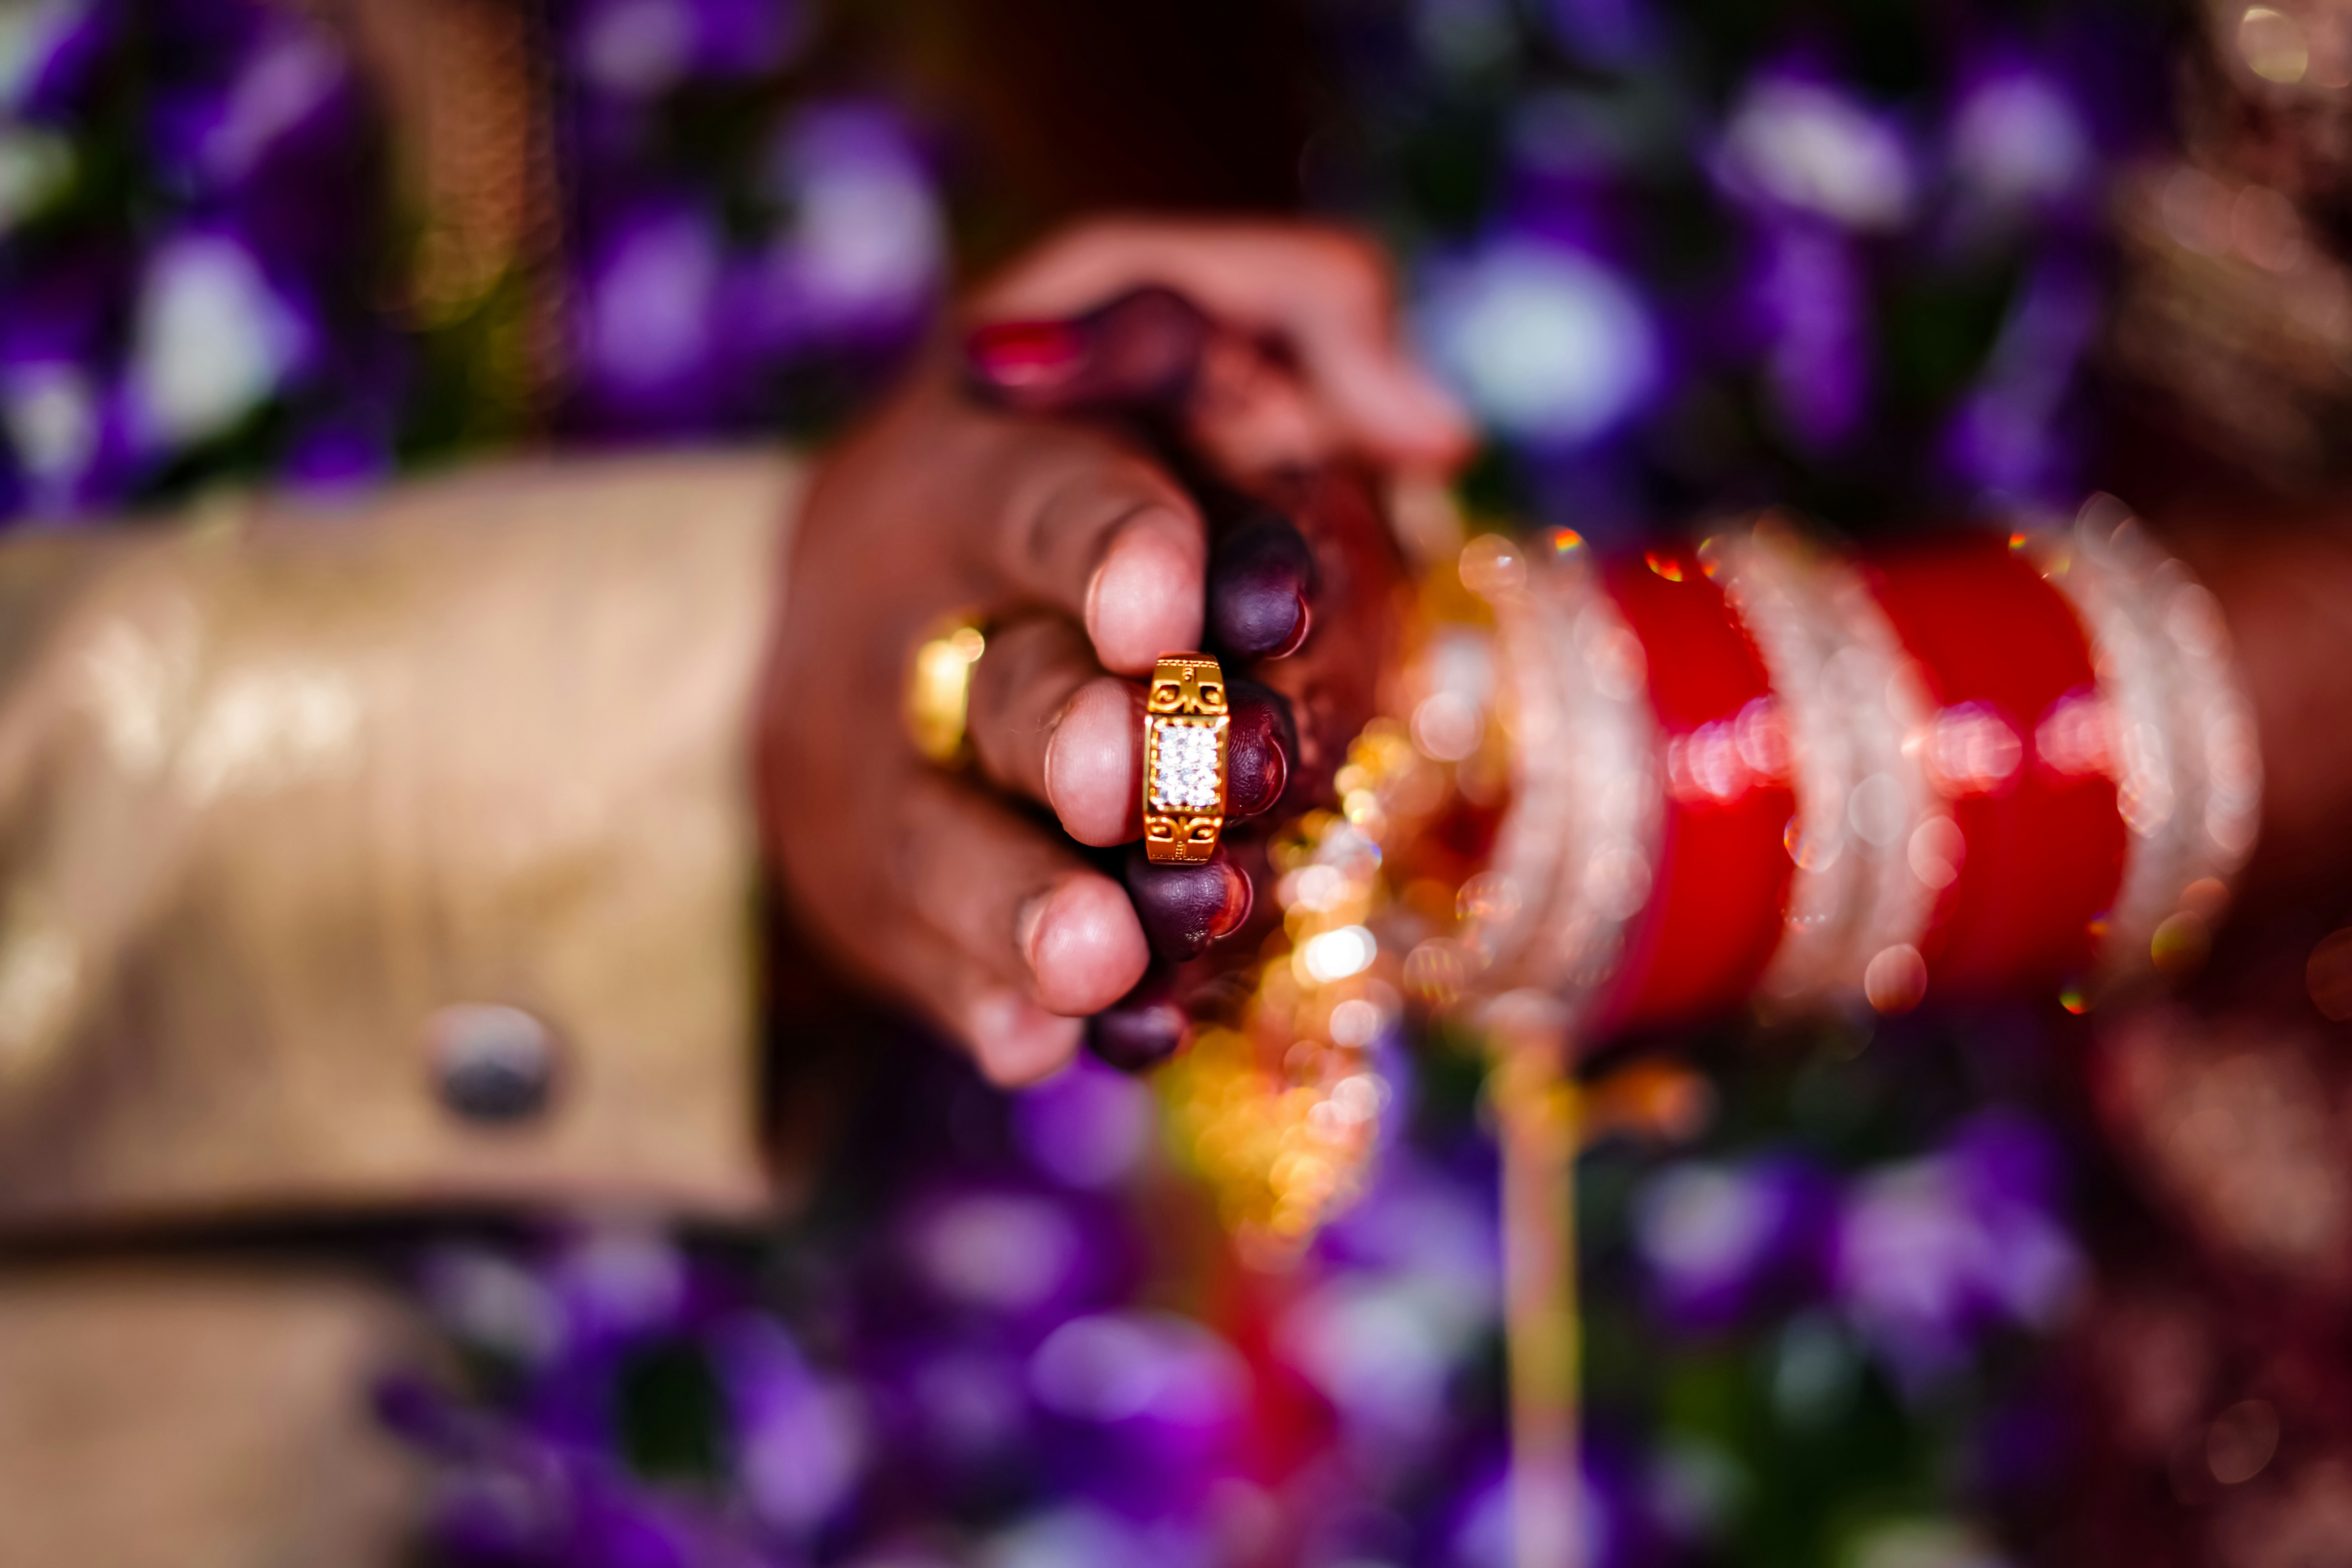 Get the wedding ring in your hand and get it photographed.